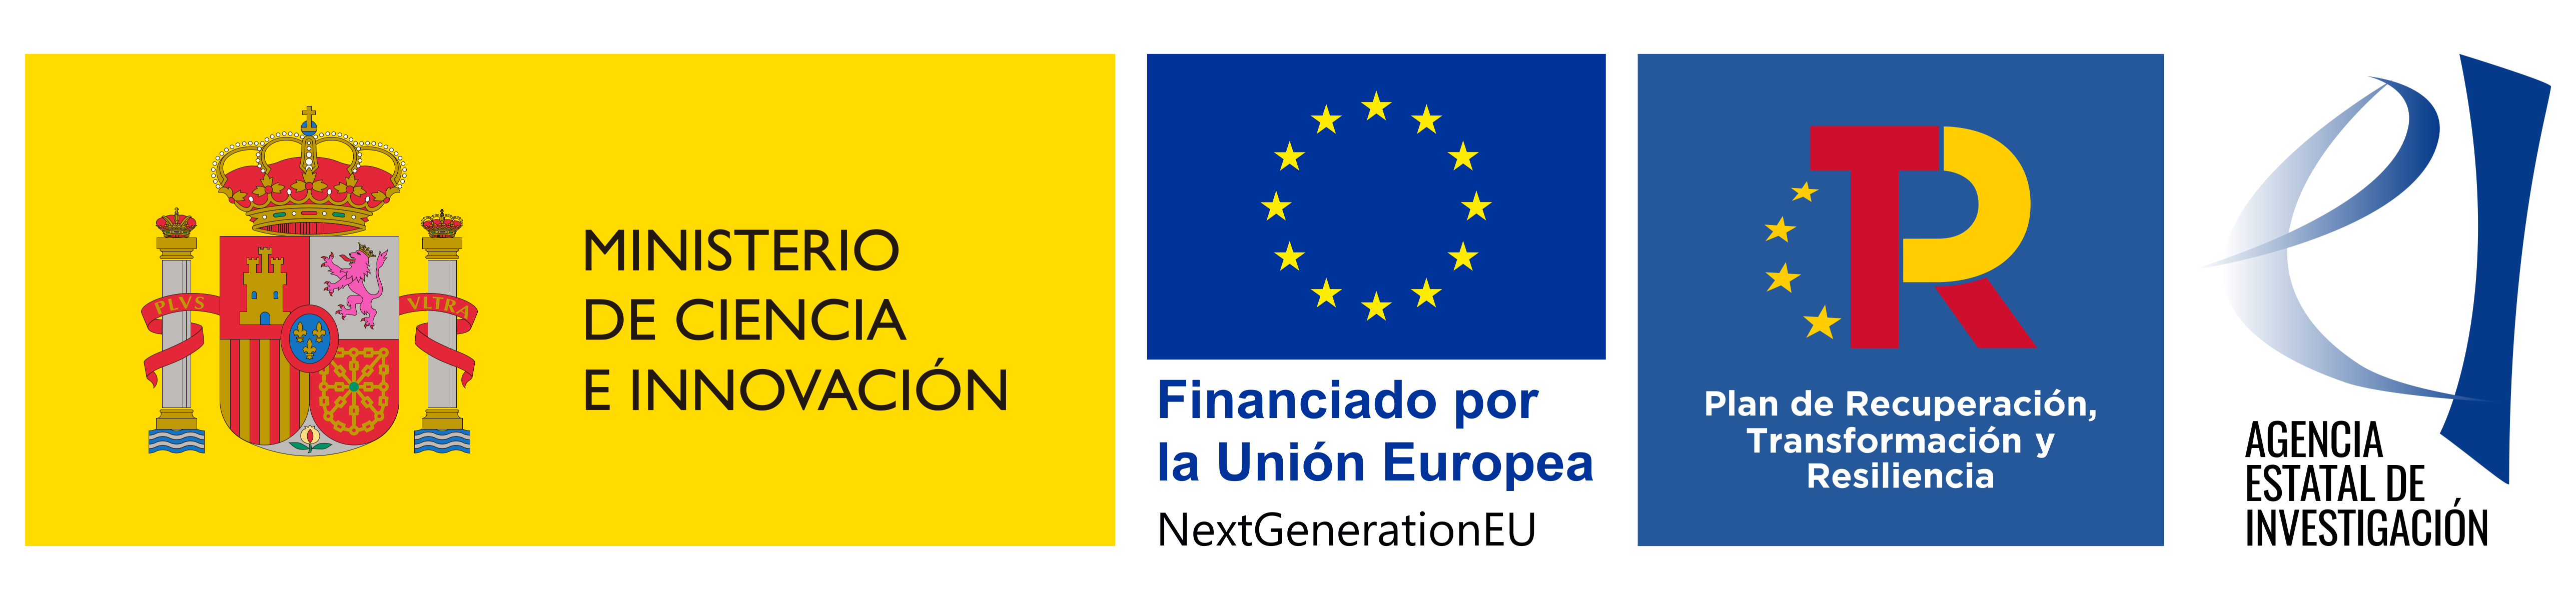 Grant PDC2021-121510-I00 funded by MCIN/AEI /10.13039/501100011033 and by European Union NextGenerationEU/PTR